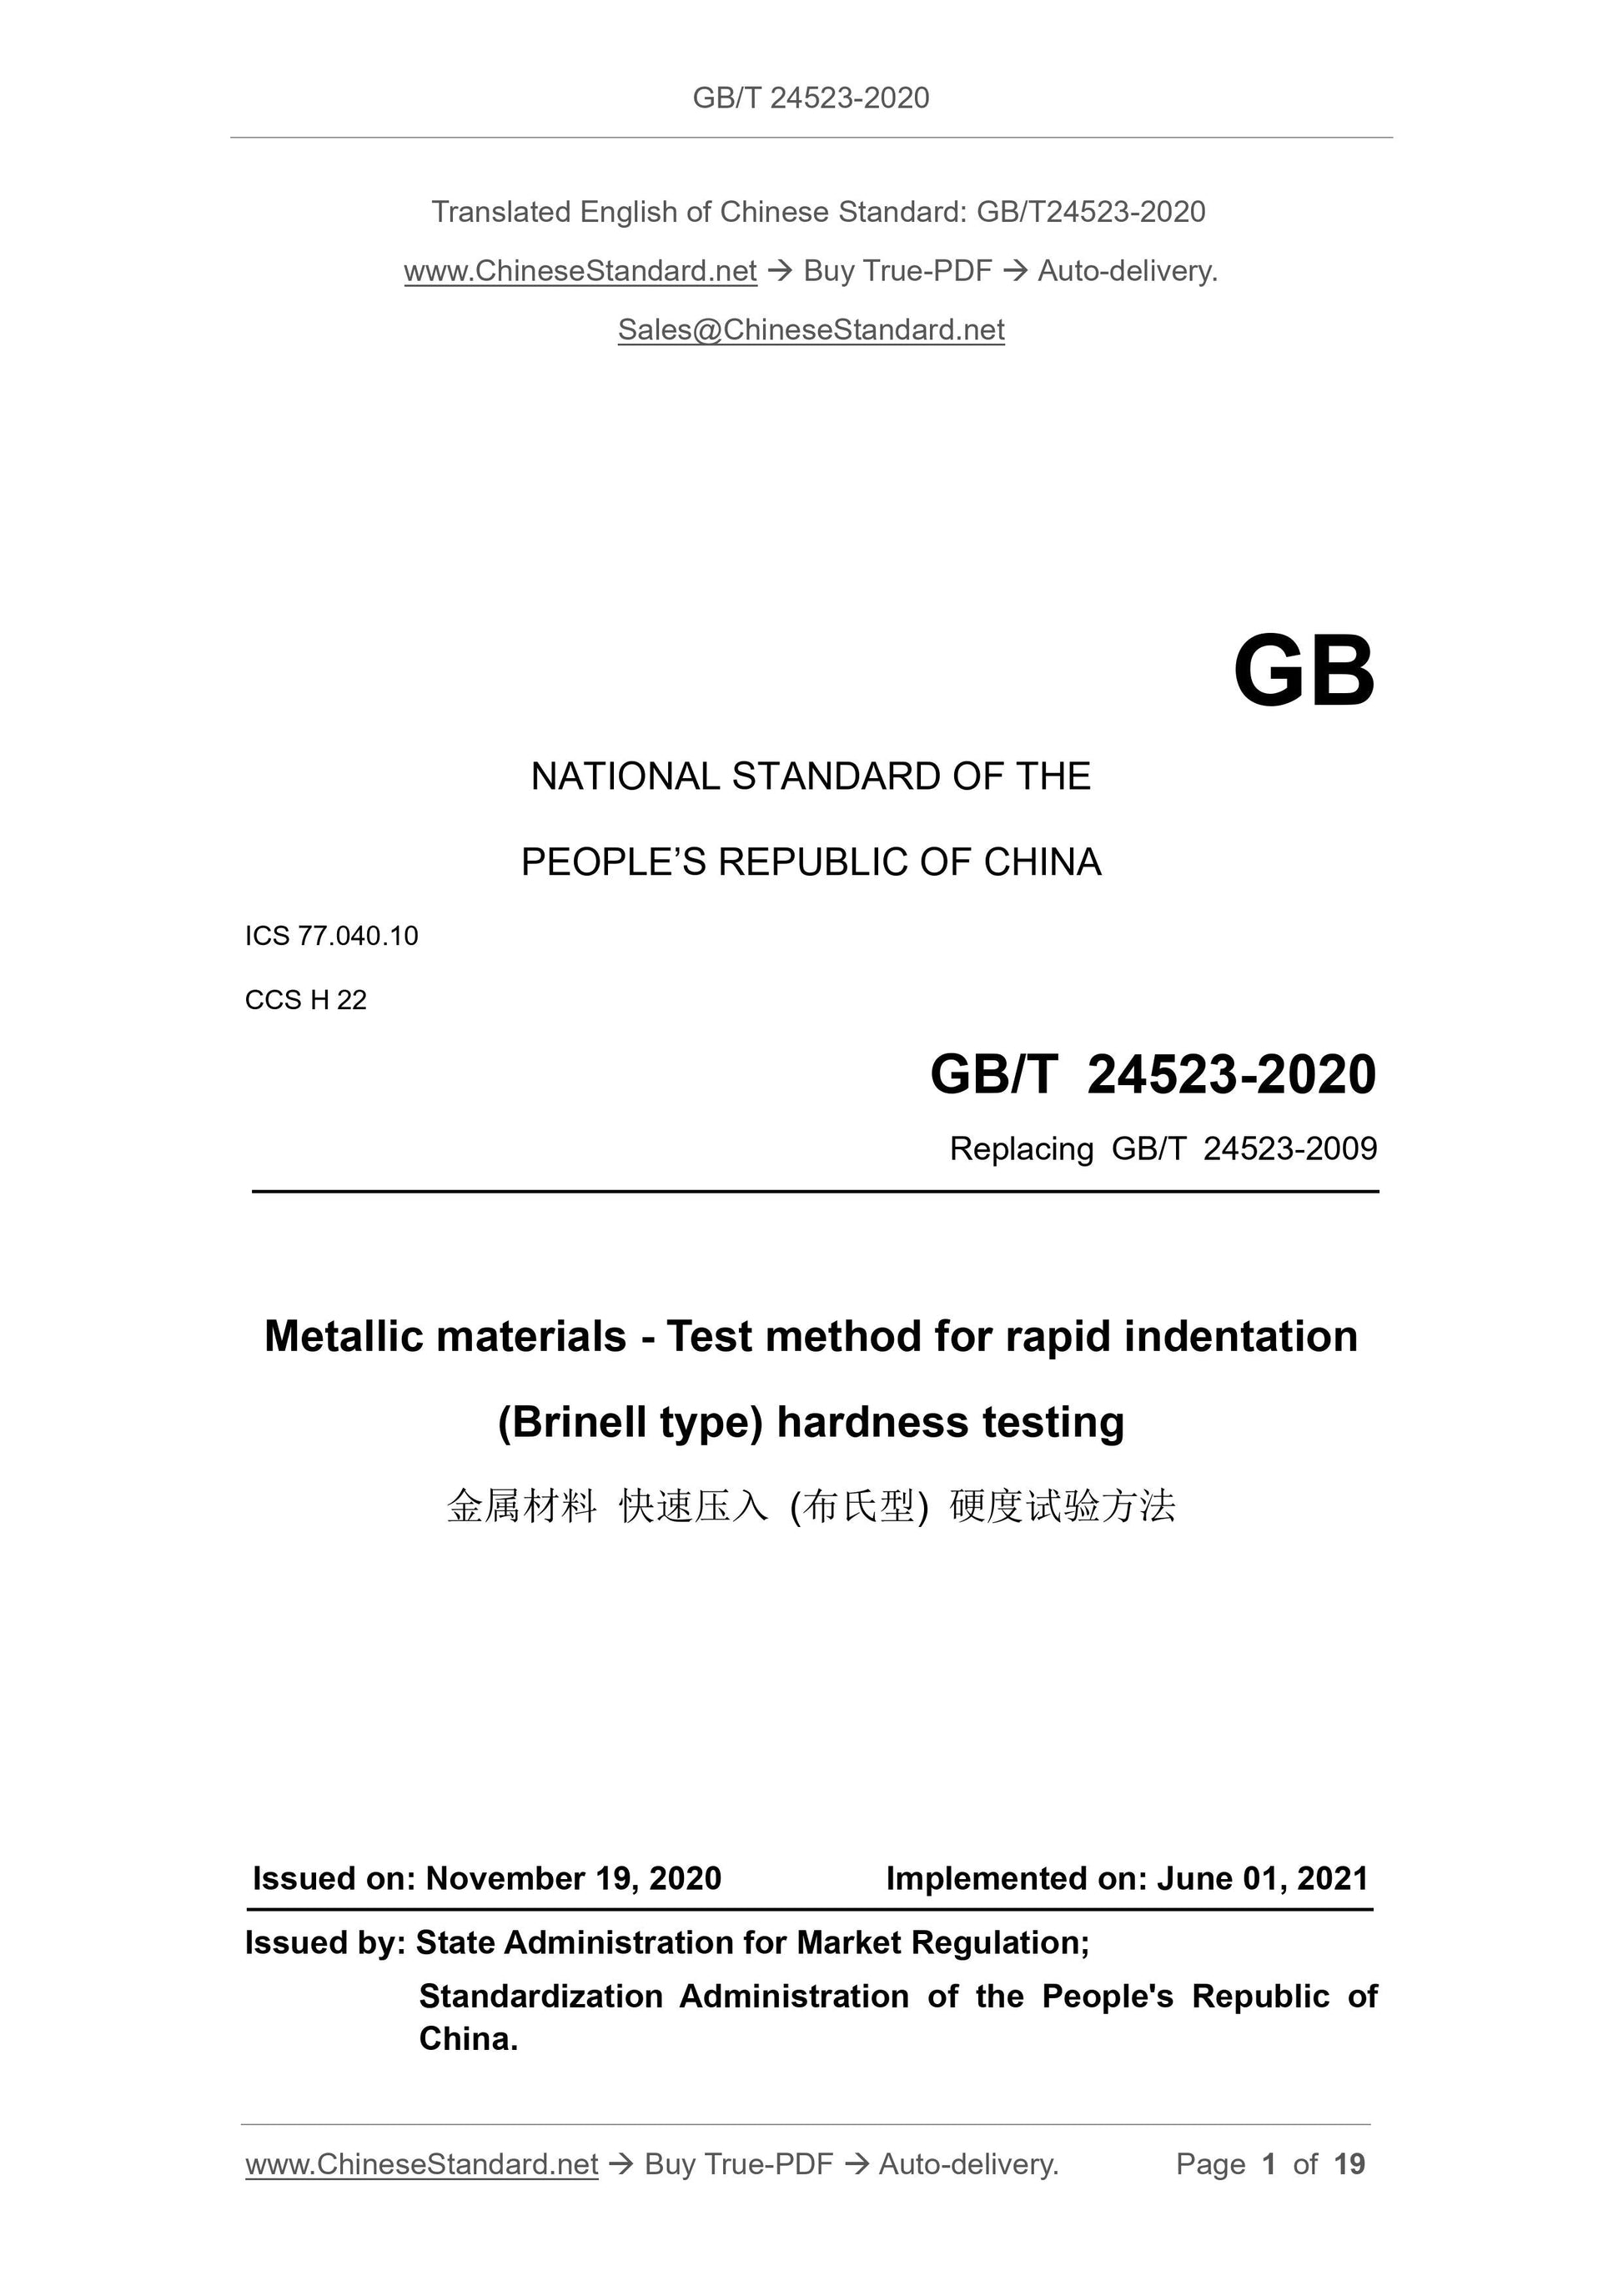 GB/T 24523-2020 Page 1